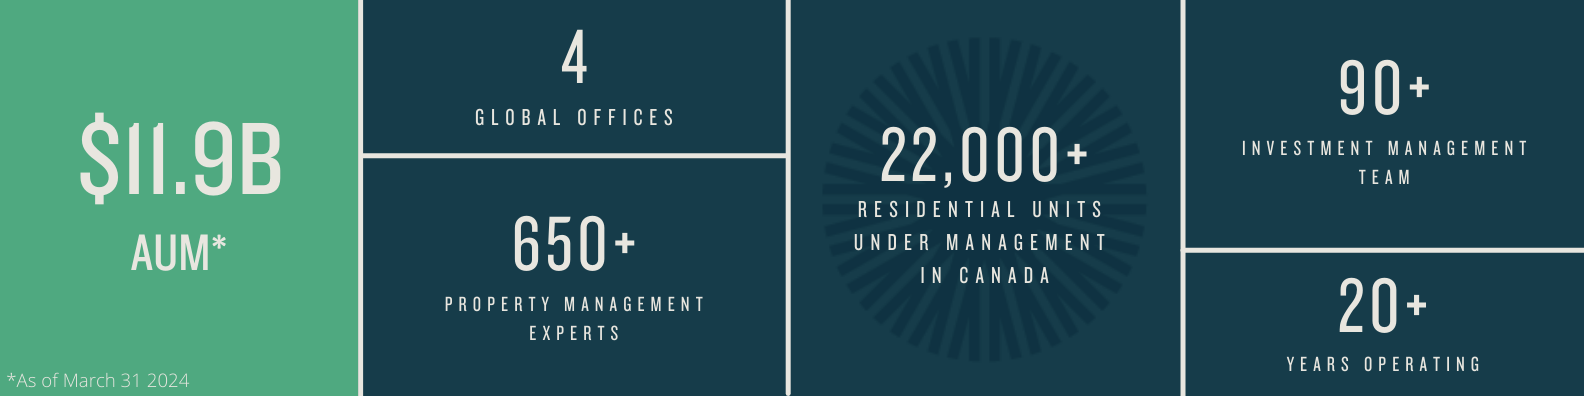 AUM 11.9Billion; 4 Global offices, 20+ year operating; Fully Integrated platform, 90+ investment management team; 650+ property management experts; 22,000+ residential units under management in Canada; as of March 31, 2024.